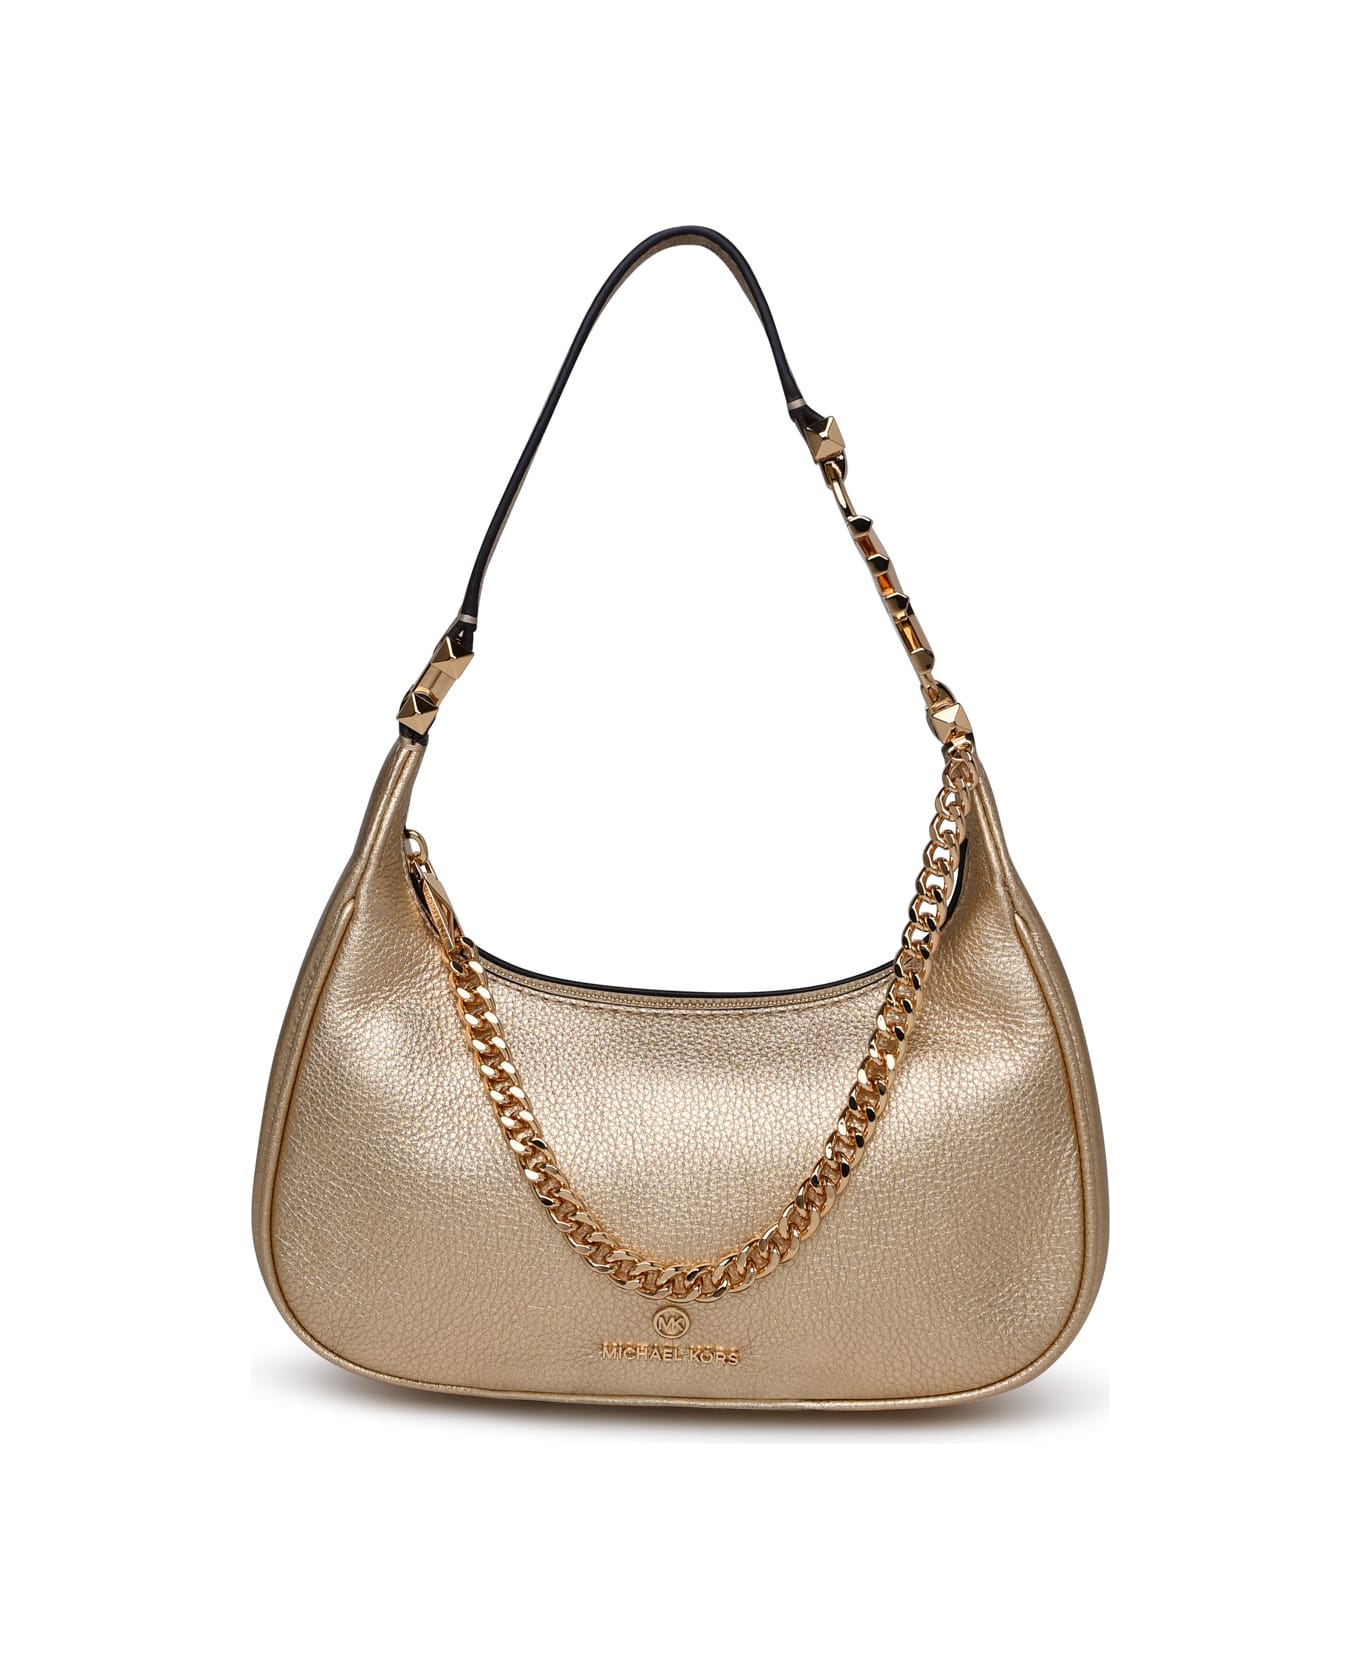 Michael Kors Piper Leather Bag - Gold